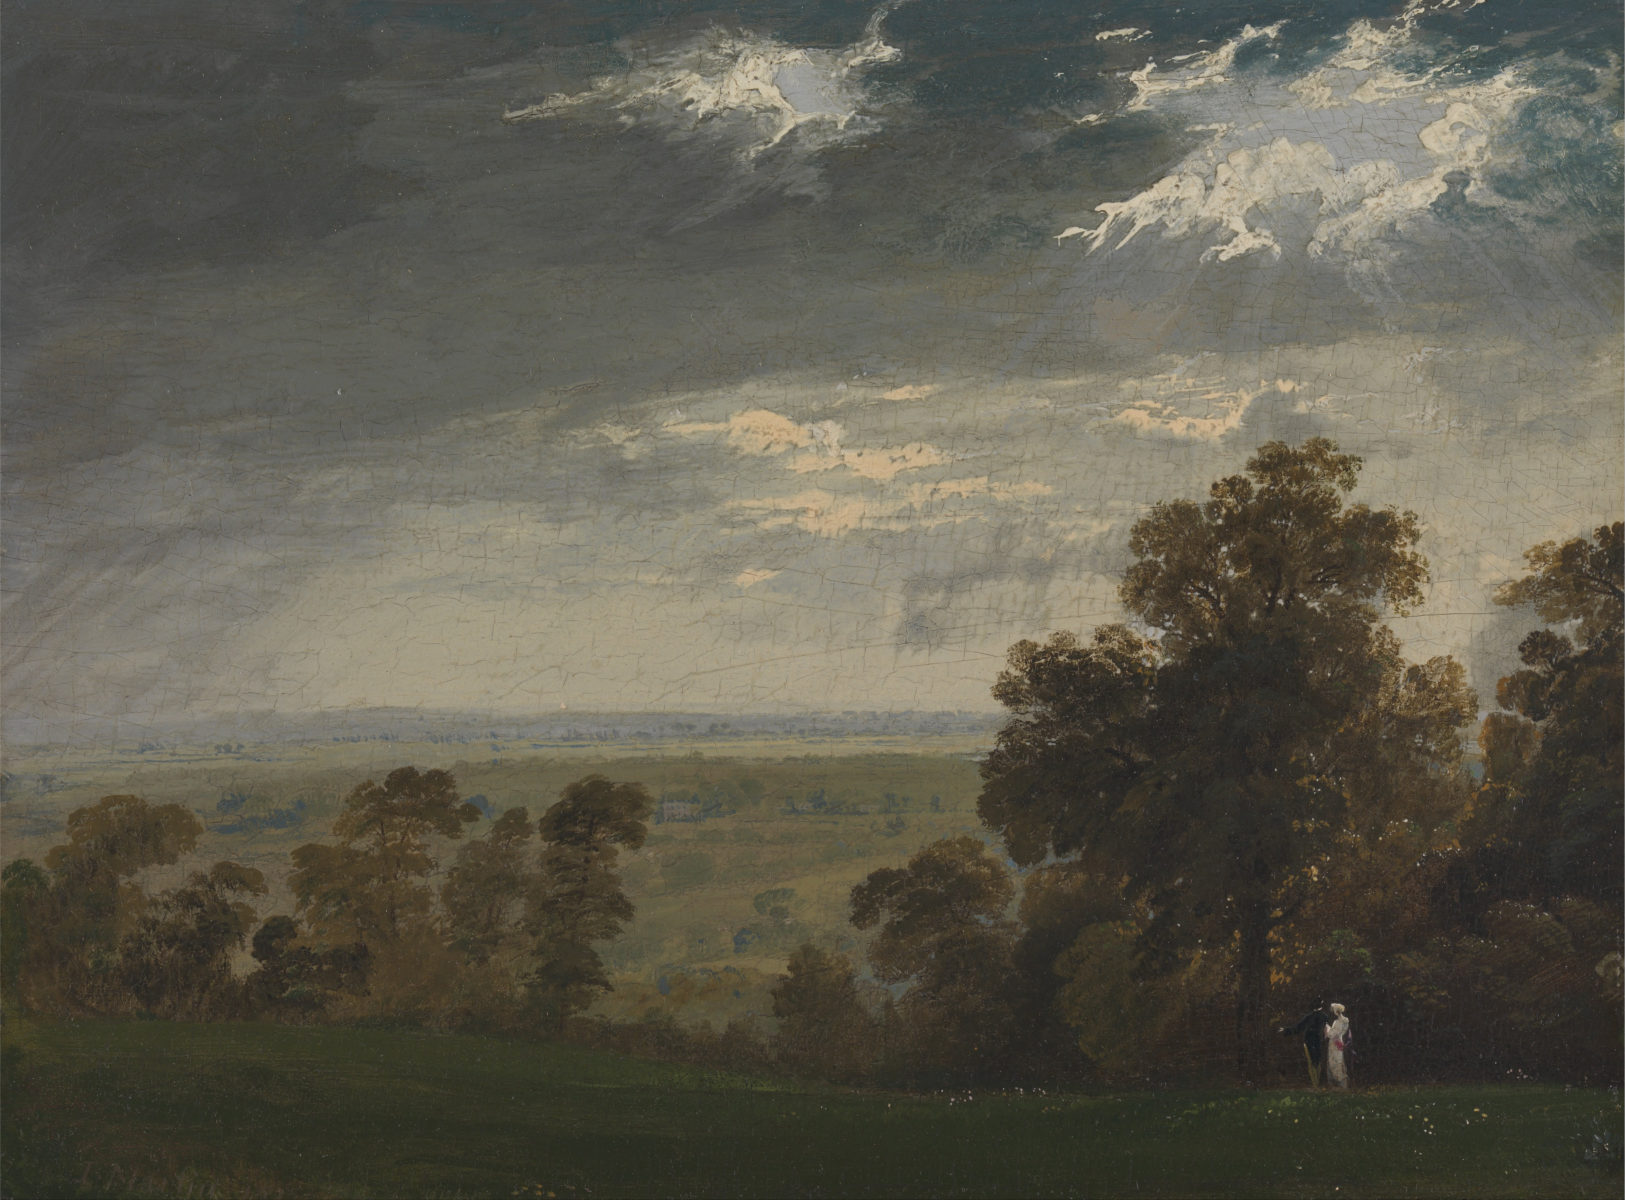 John Martin: Landscape, Possibly the Isle of Wight or Richmond Hill